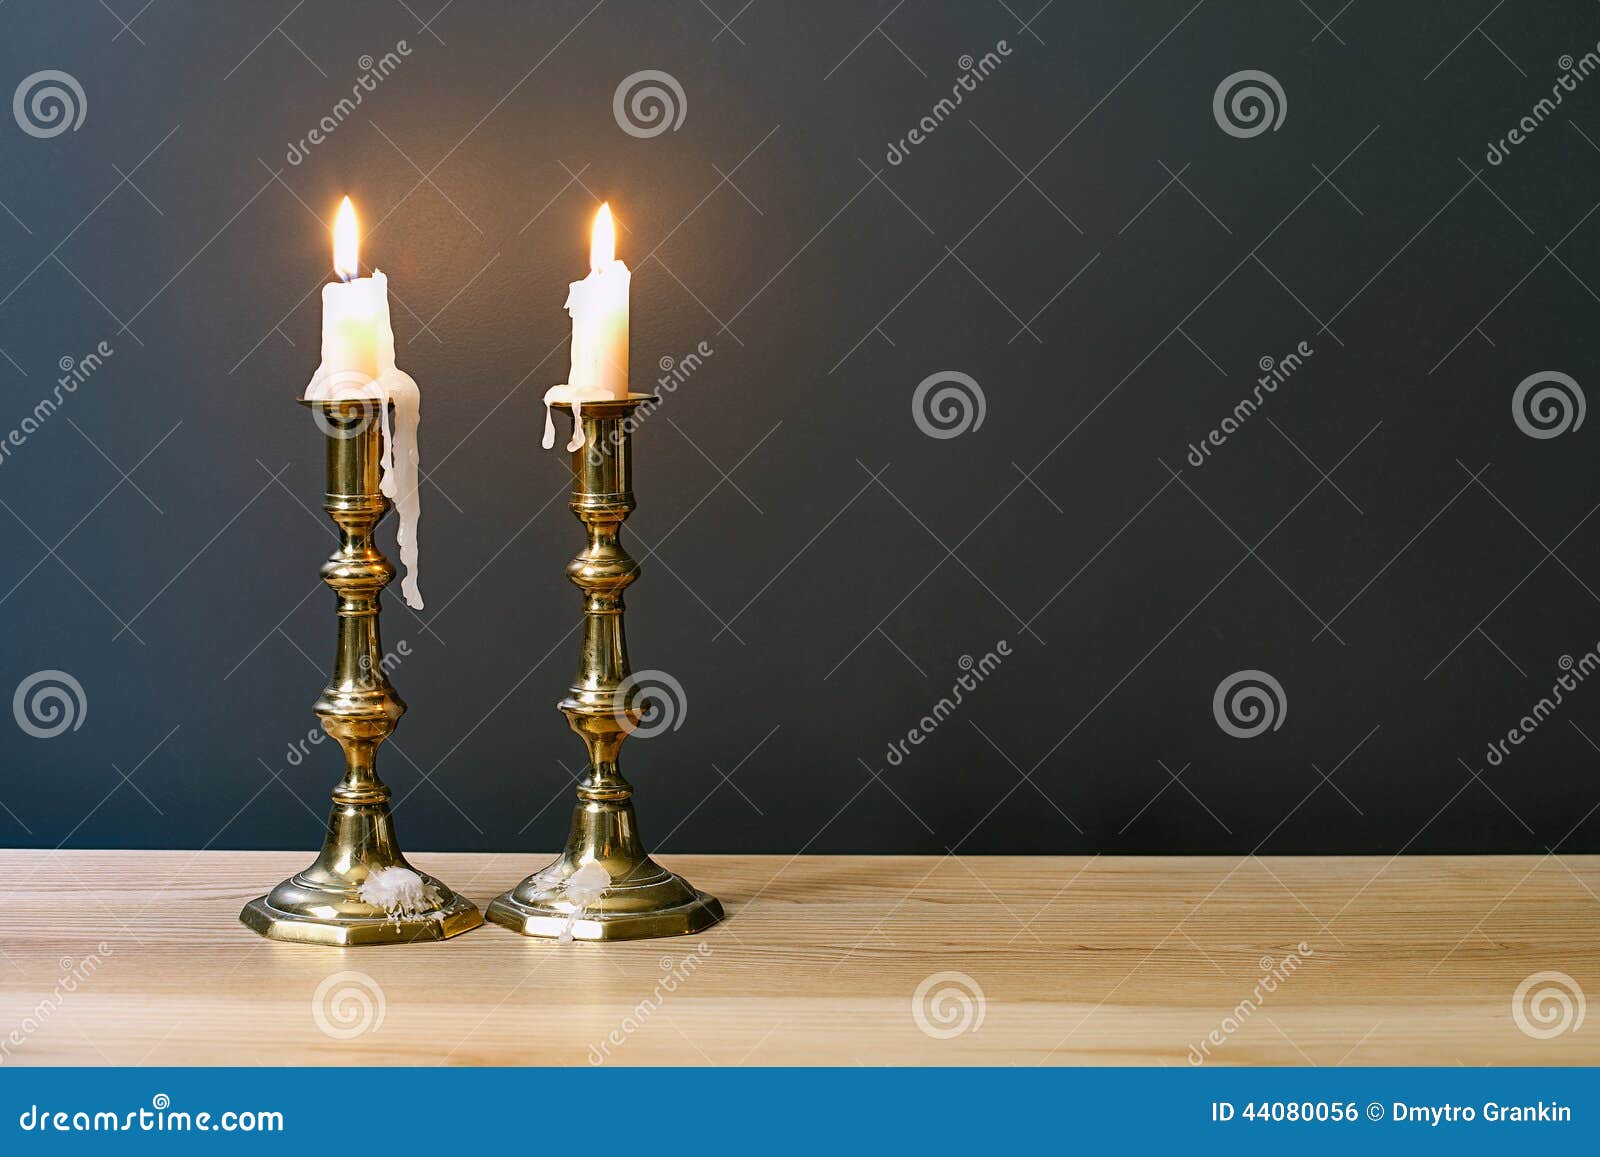 retro candelabra with burning candles in minimalist room